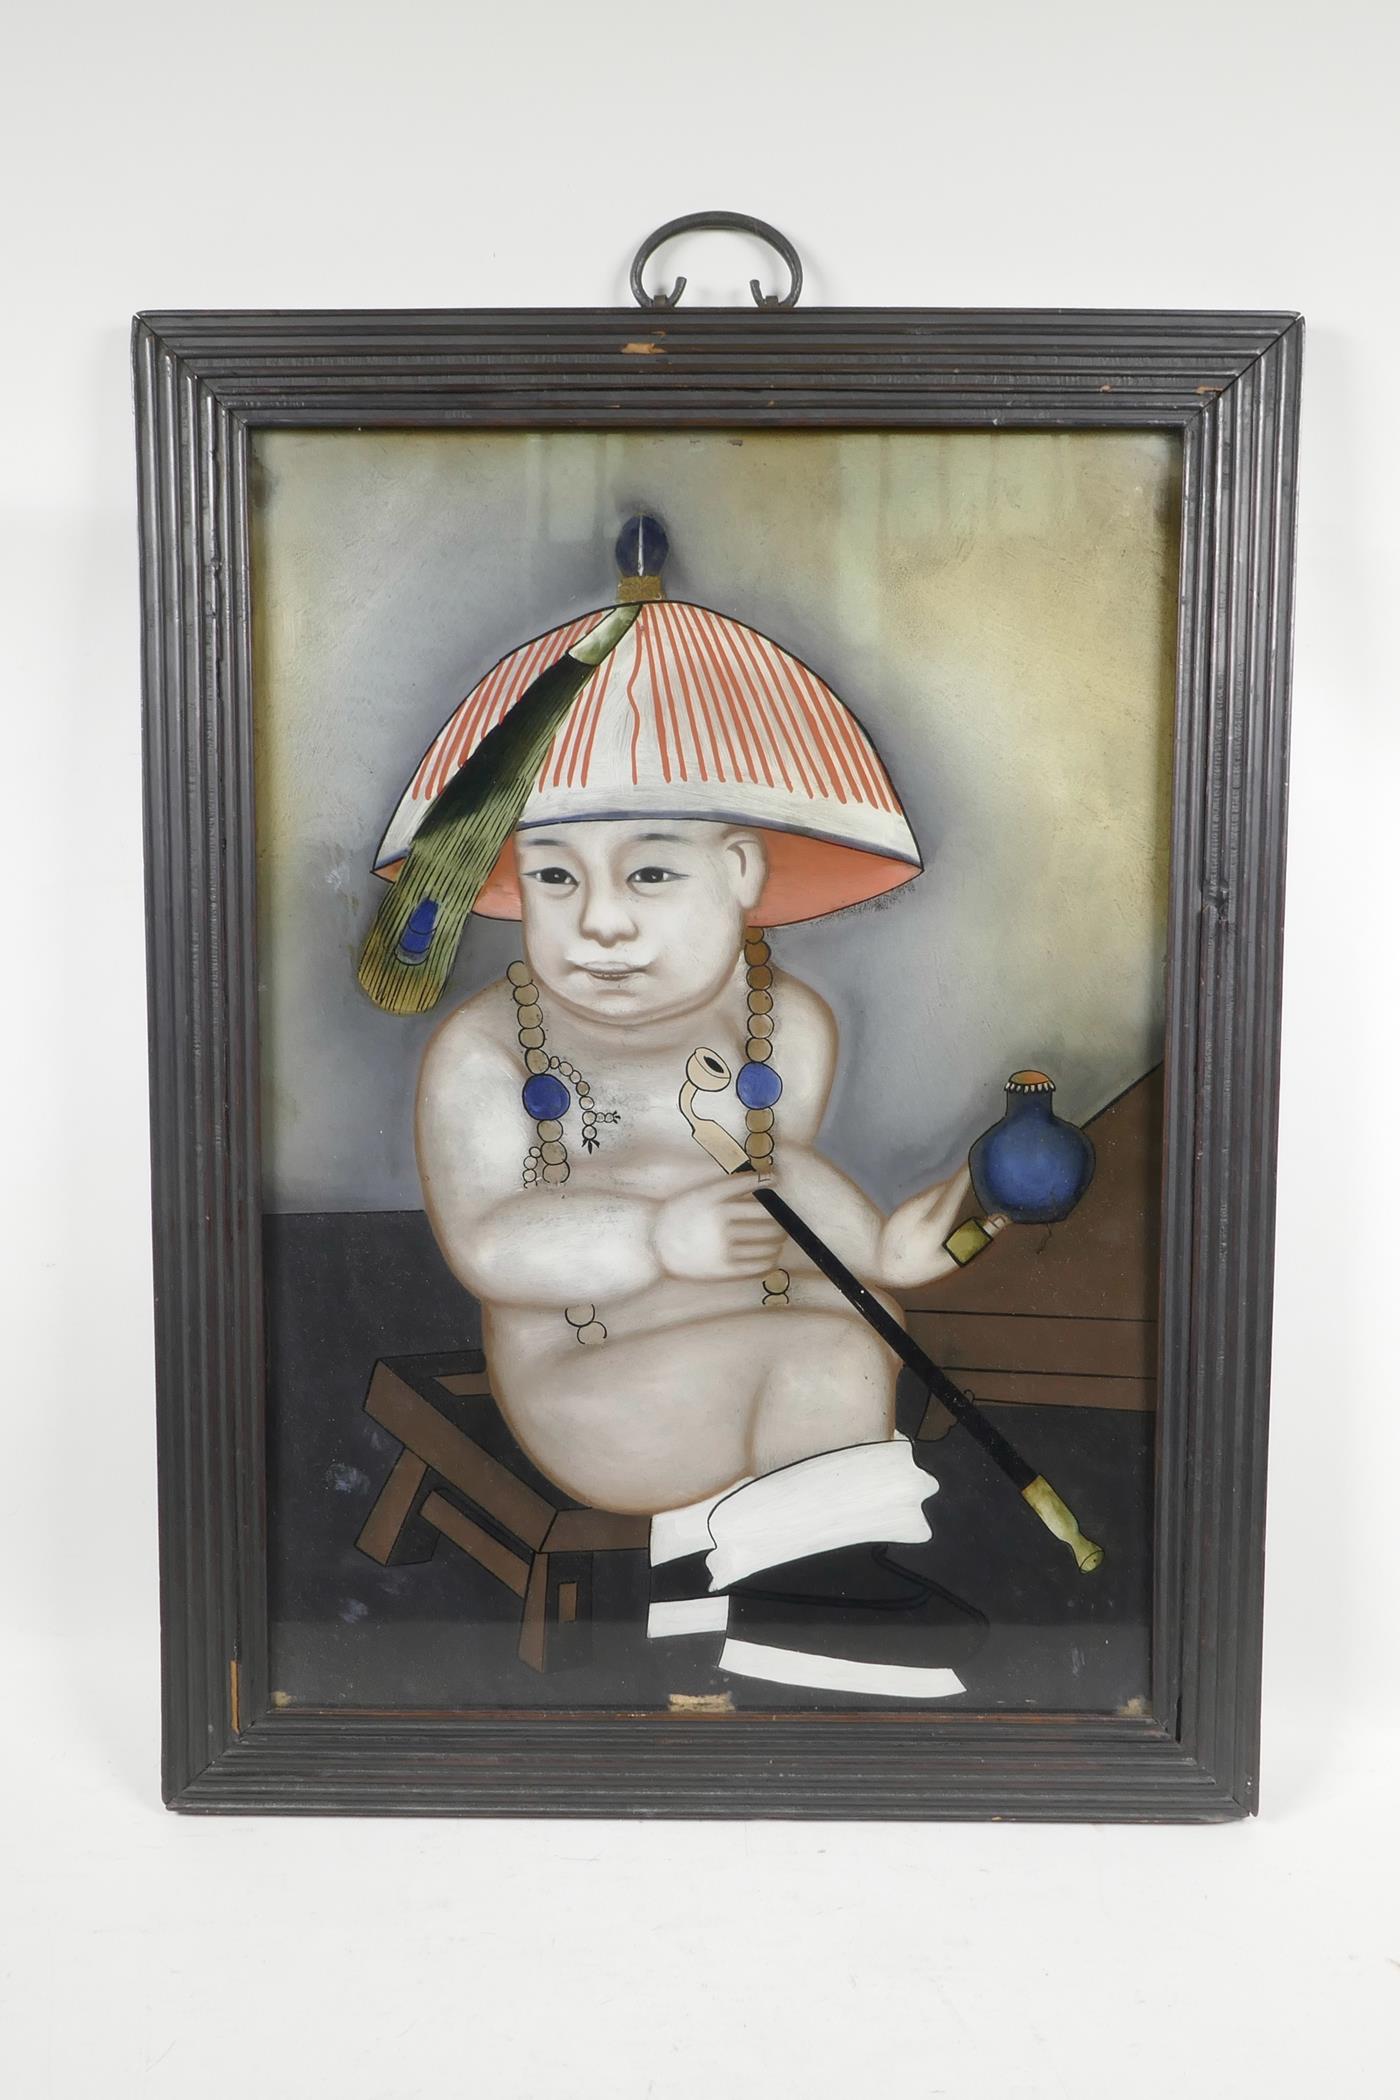 A Chinese reverse painting on glass depicting a boy with an opium pipe, 17" x 22½" - Image 2 of 2